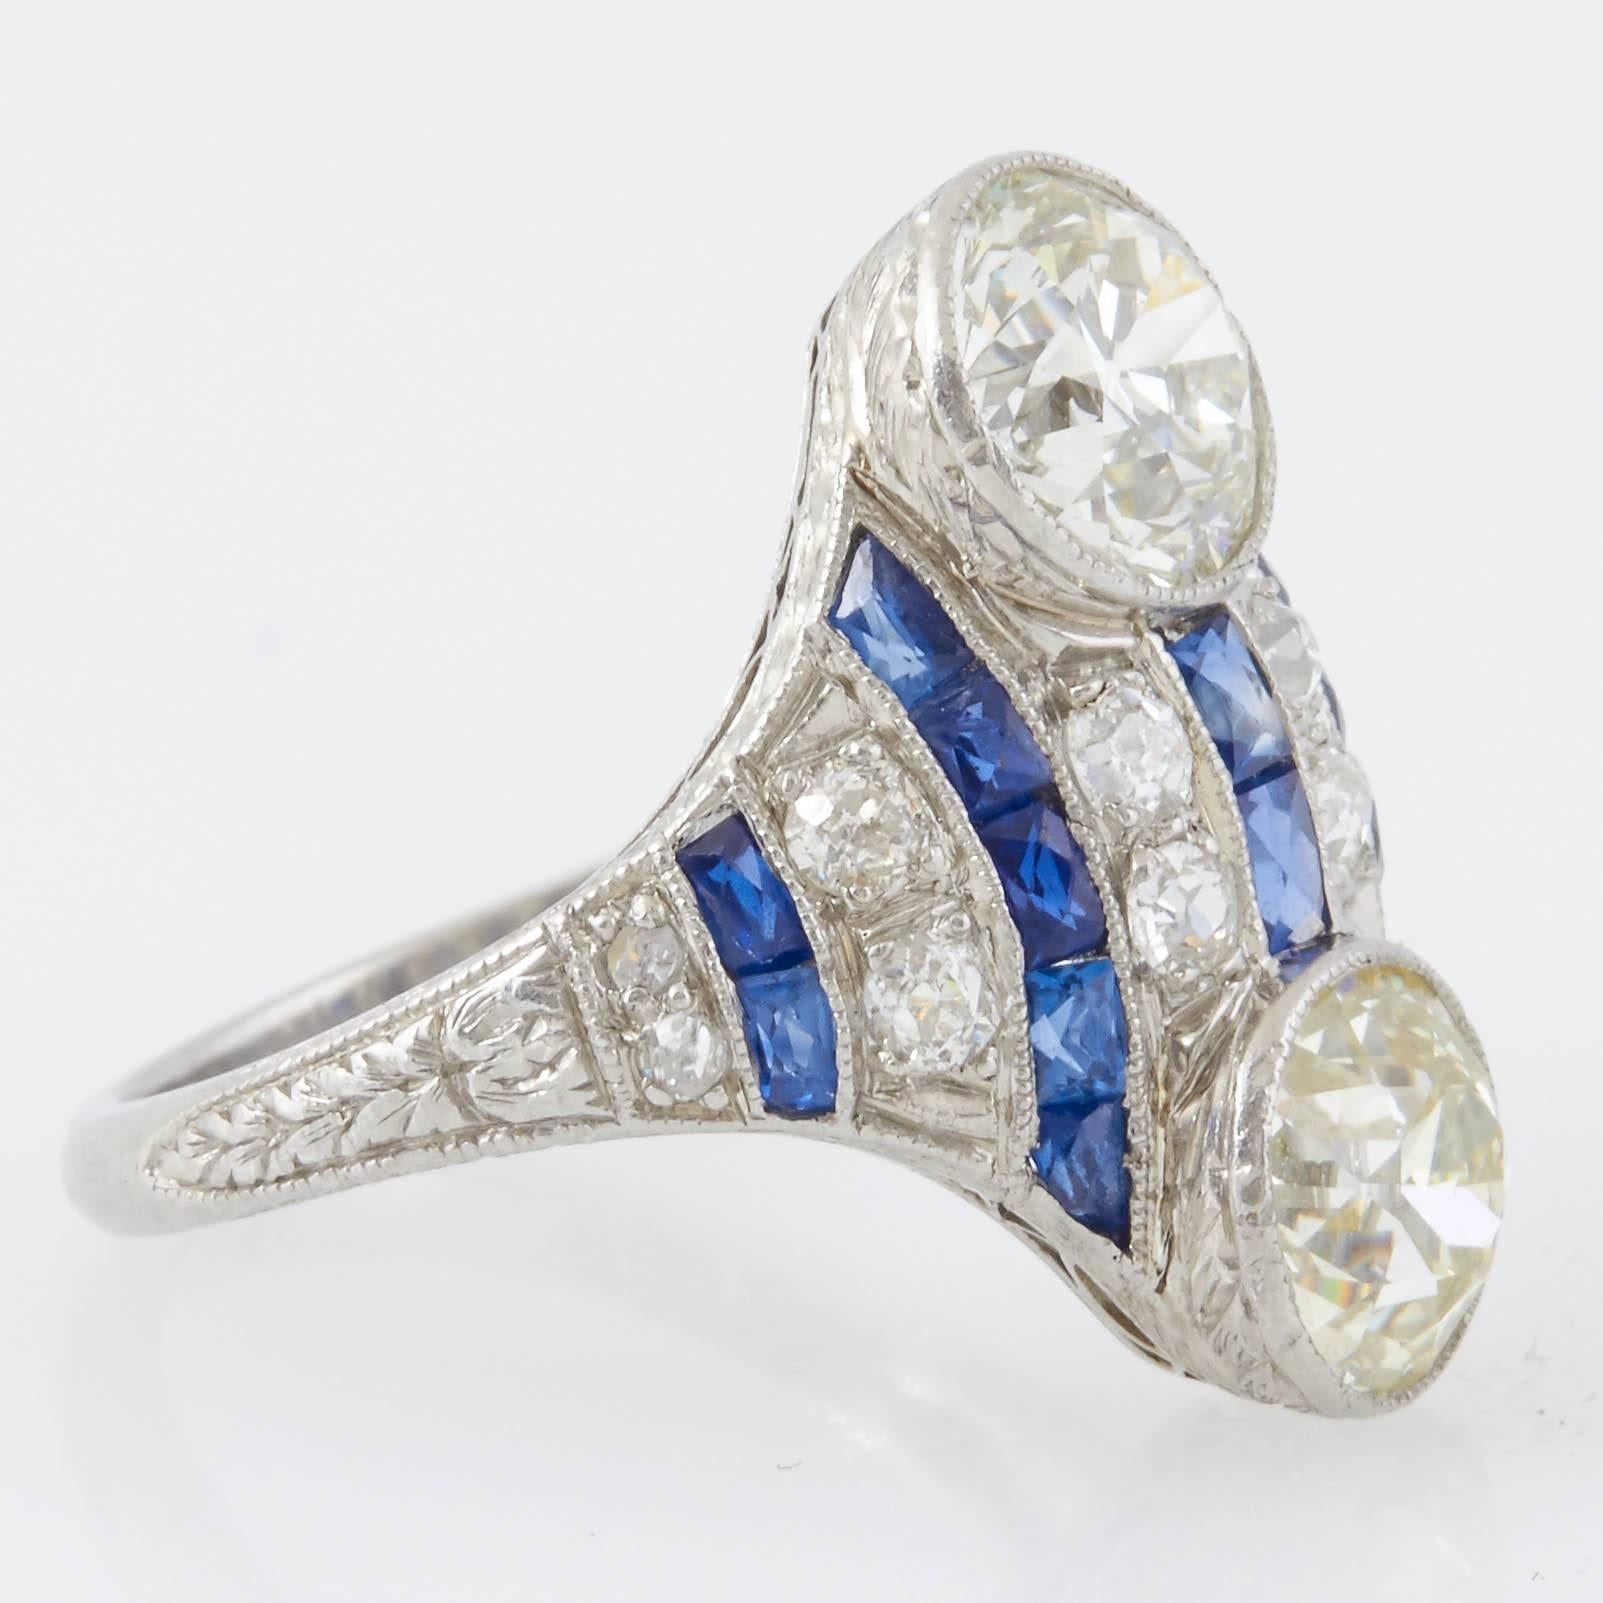 Original Art Deco dinner ring finely crafted in platinum features 2 large round cut diamonds and 12 smaller round cut diamonds weighing a total of approximately 3.00 carats. Vintage dinner ring is accented with 0.70 carat of sapphire. Ring Size US